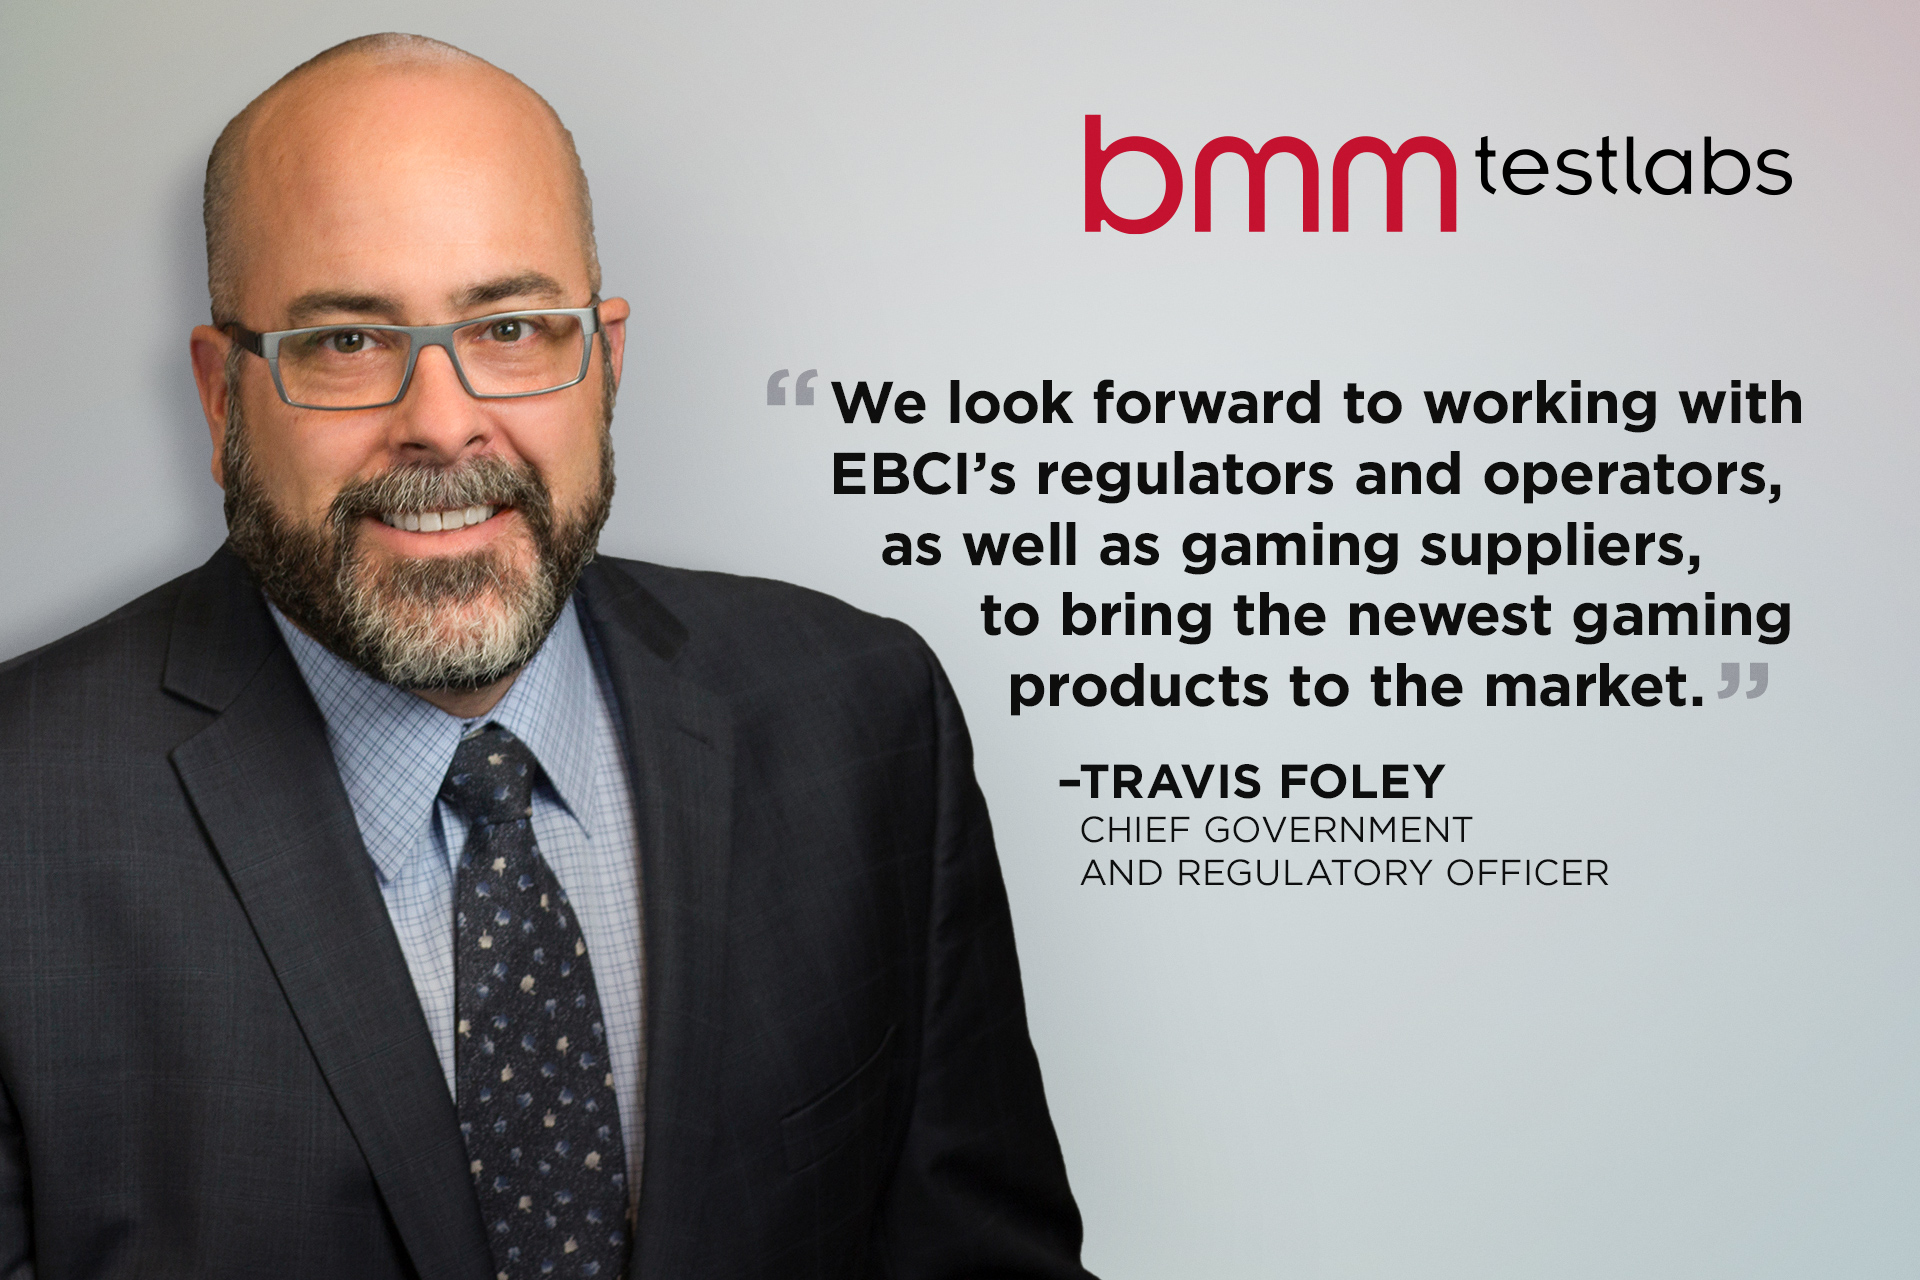 BMM Testlabs Receives Approval As An Independent Test Lab For Eastern Band Of Cherokee Indians (EBCI)